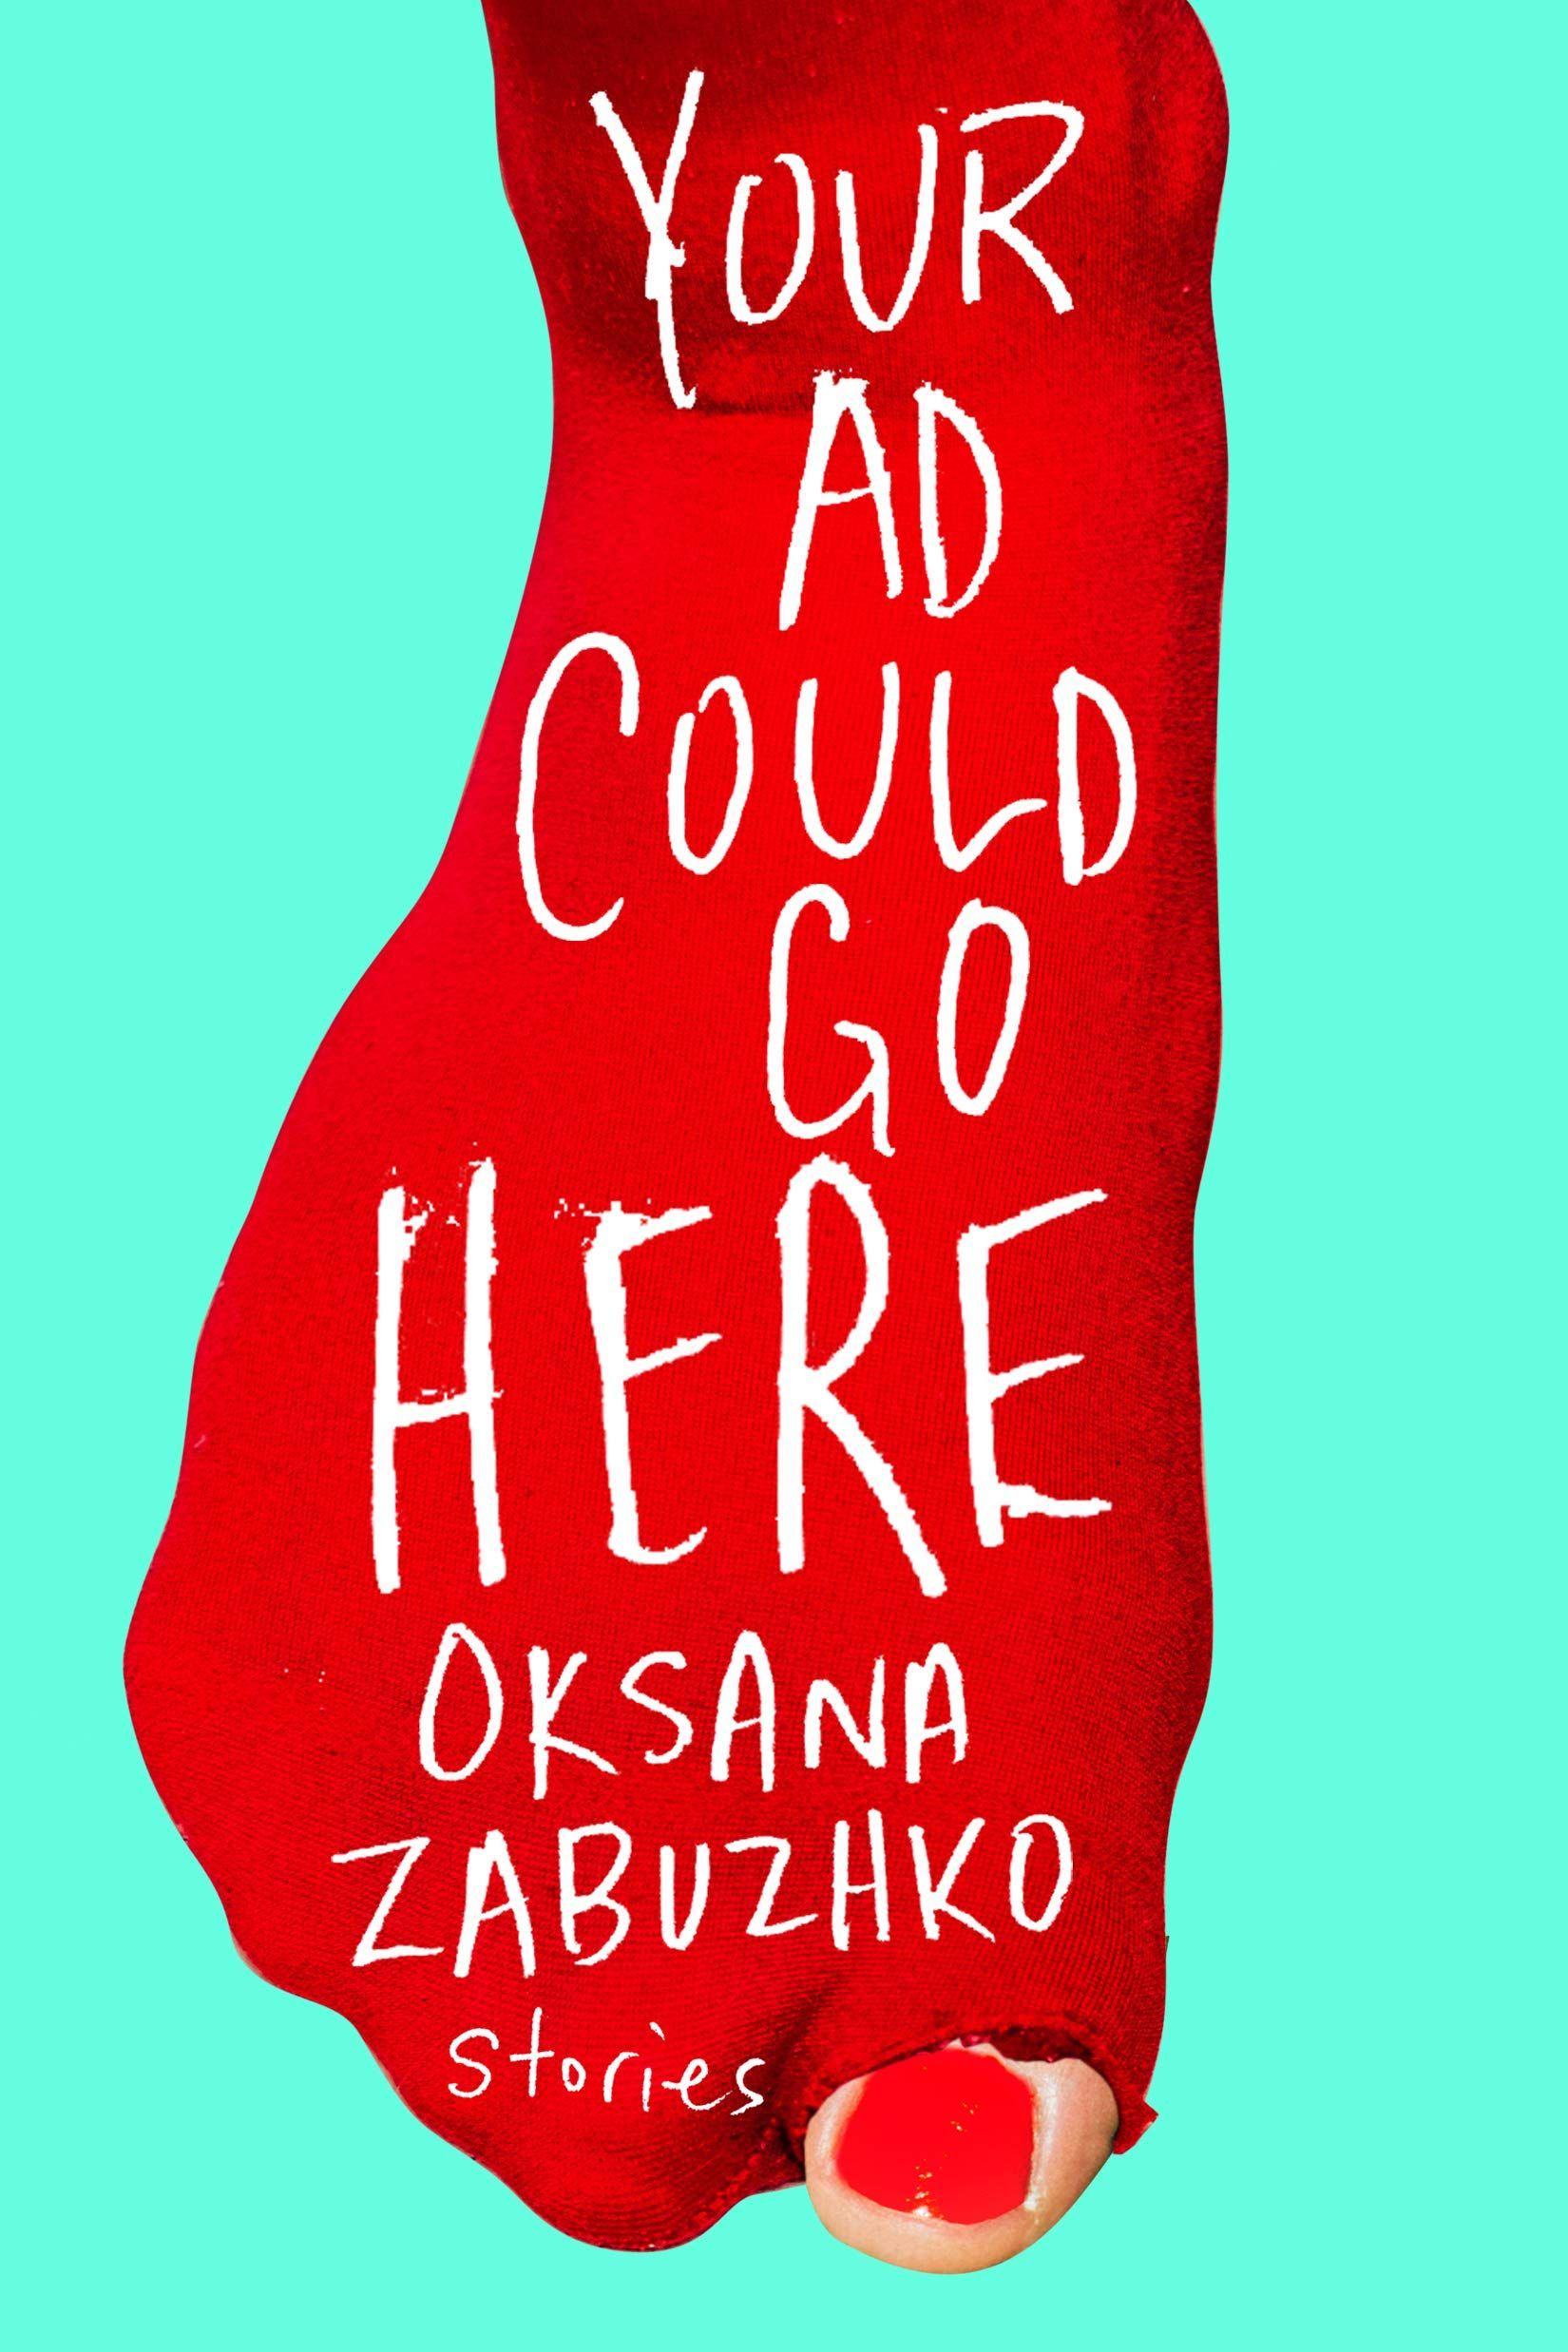 Wildly Intertwined: On Oksana Zabuzhko’s “Your Ad Could Go Here: Stories”